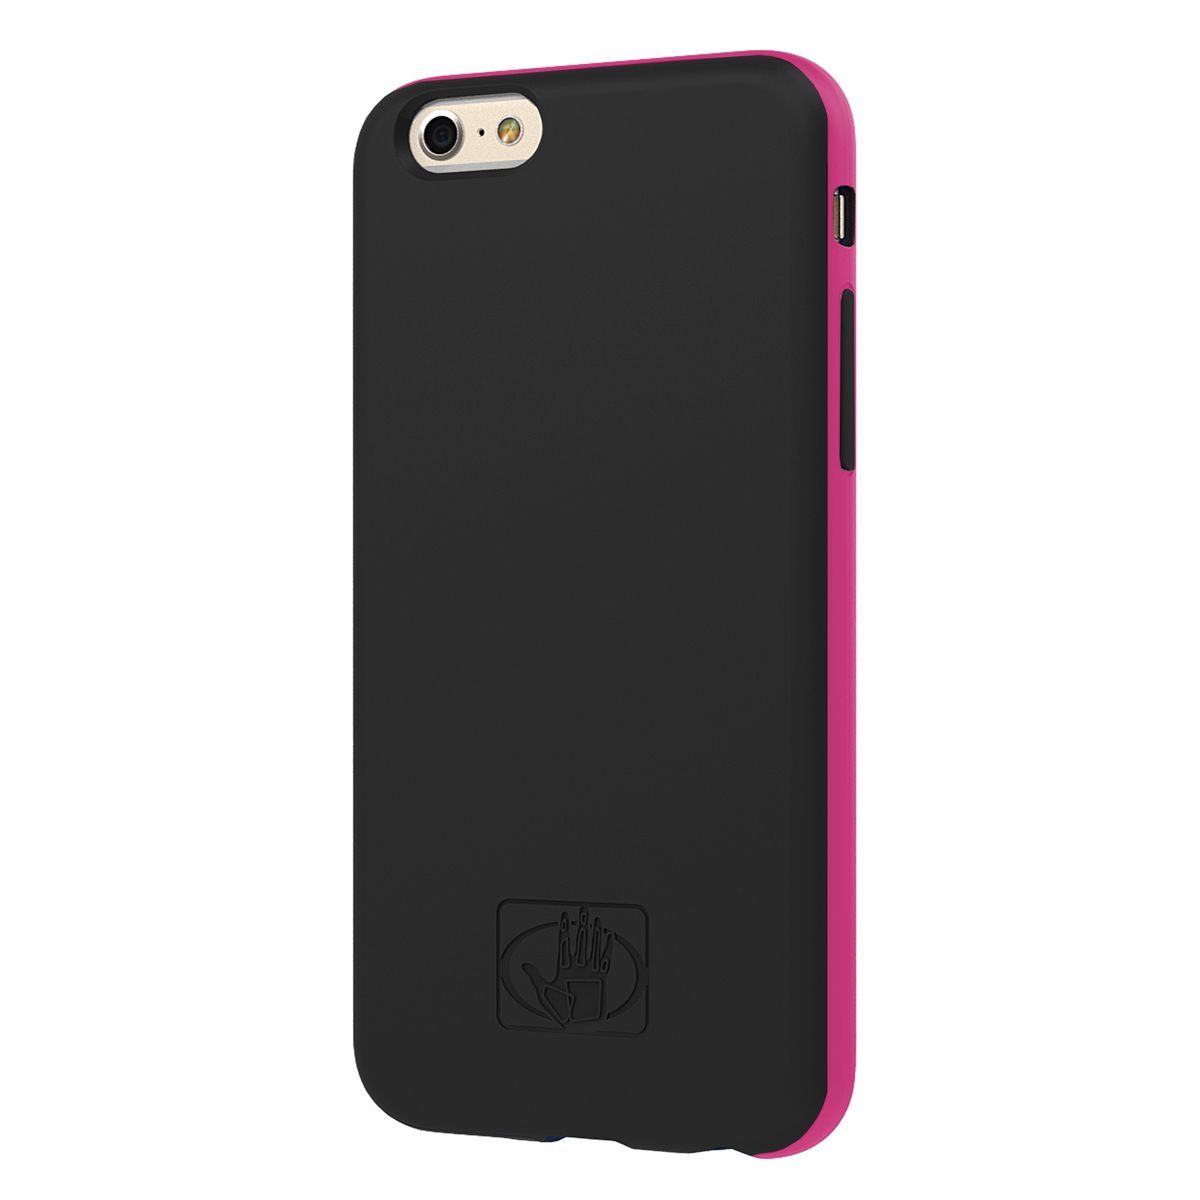 Body Glove iPhone 6 Clownfish Cover – Black and Pink